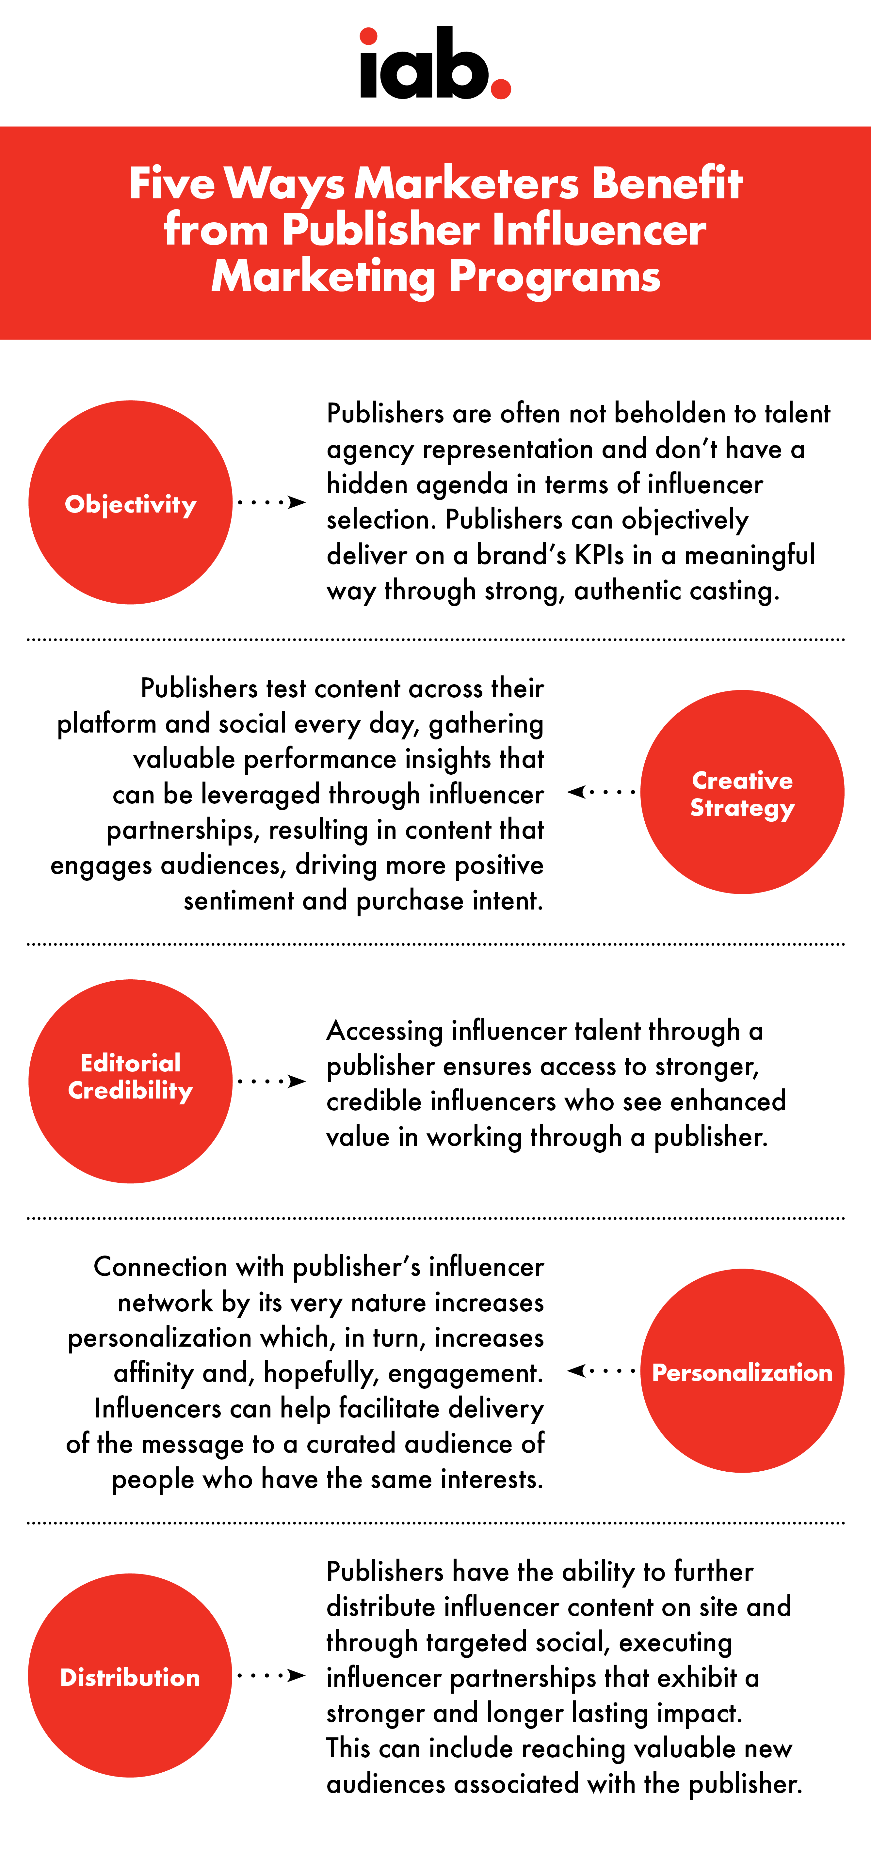 Top Five Ways Marketers Can Benefit from Publisher Influencer Marketing Programs